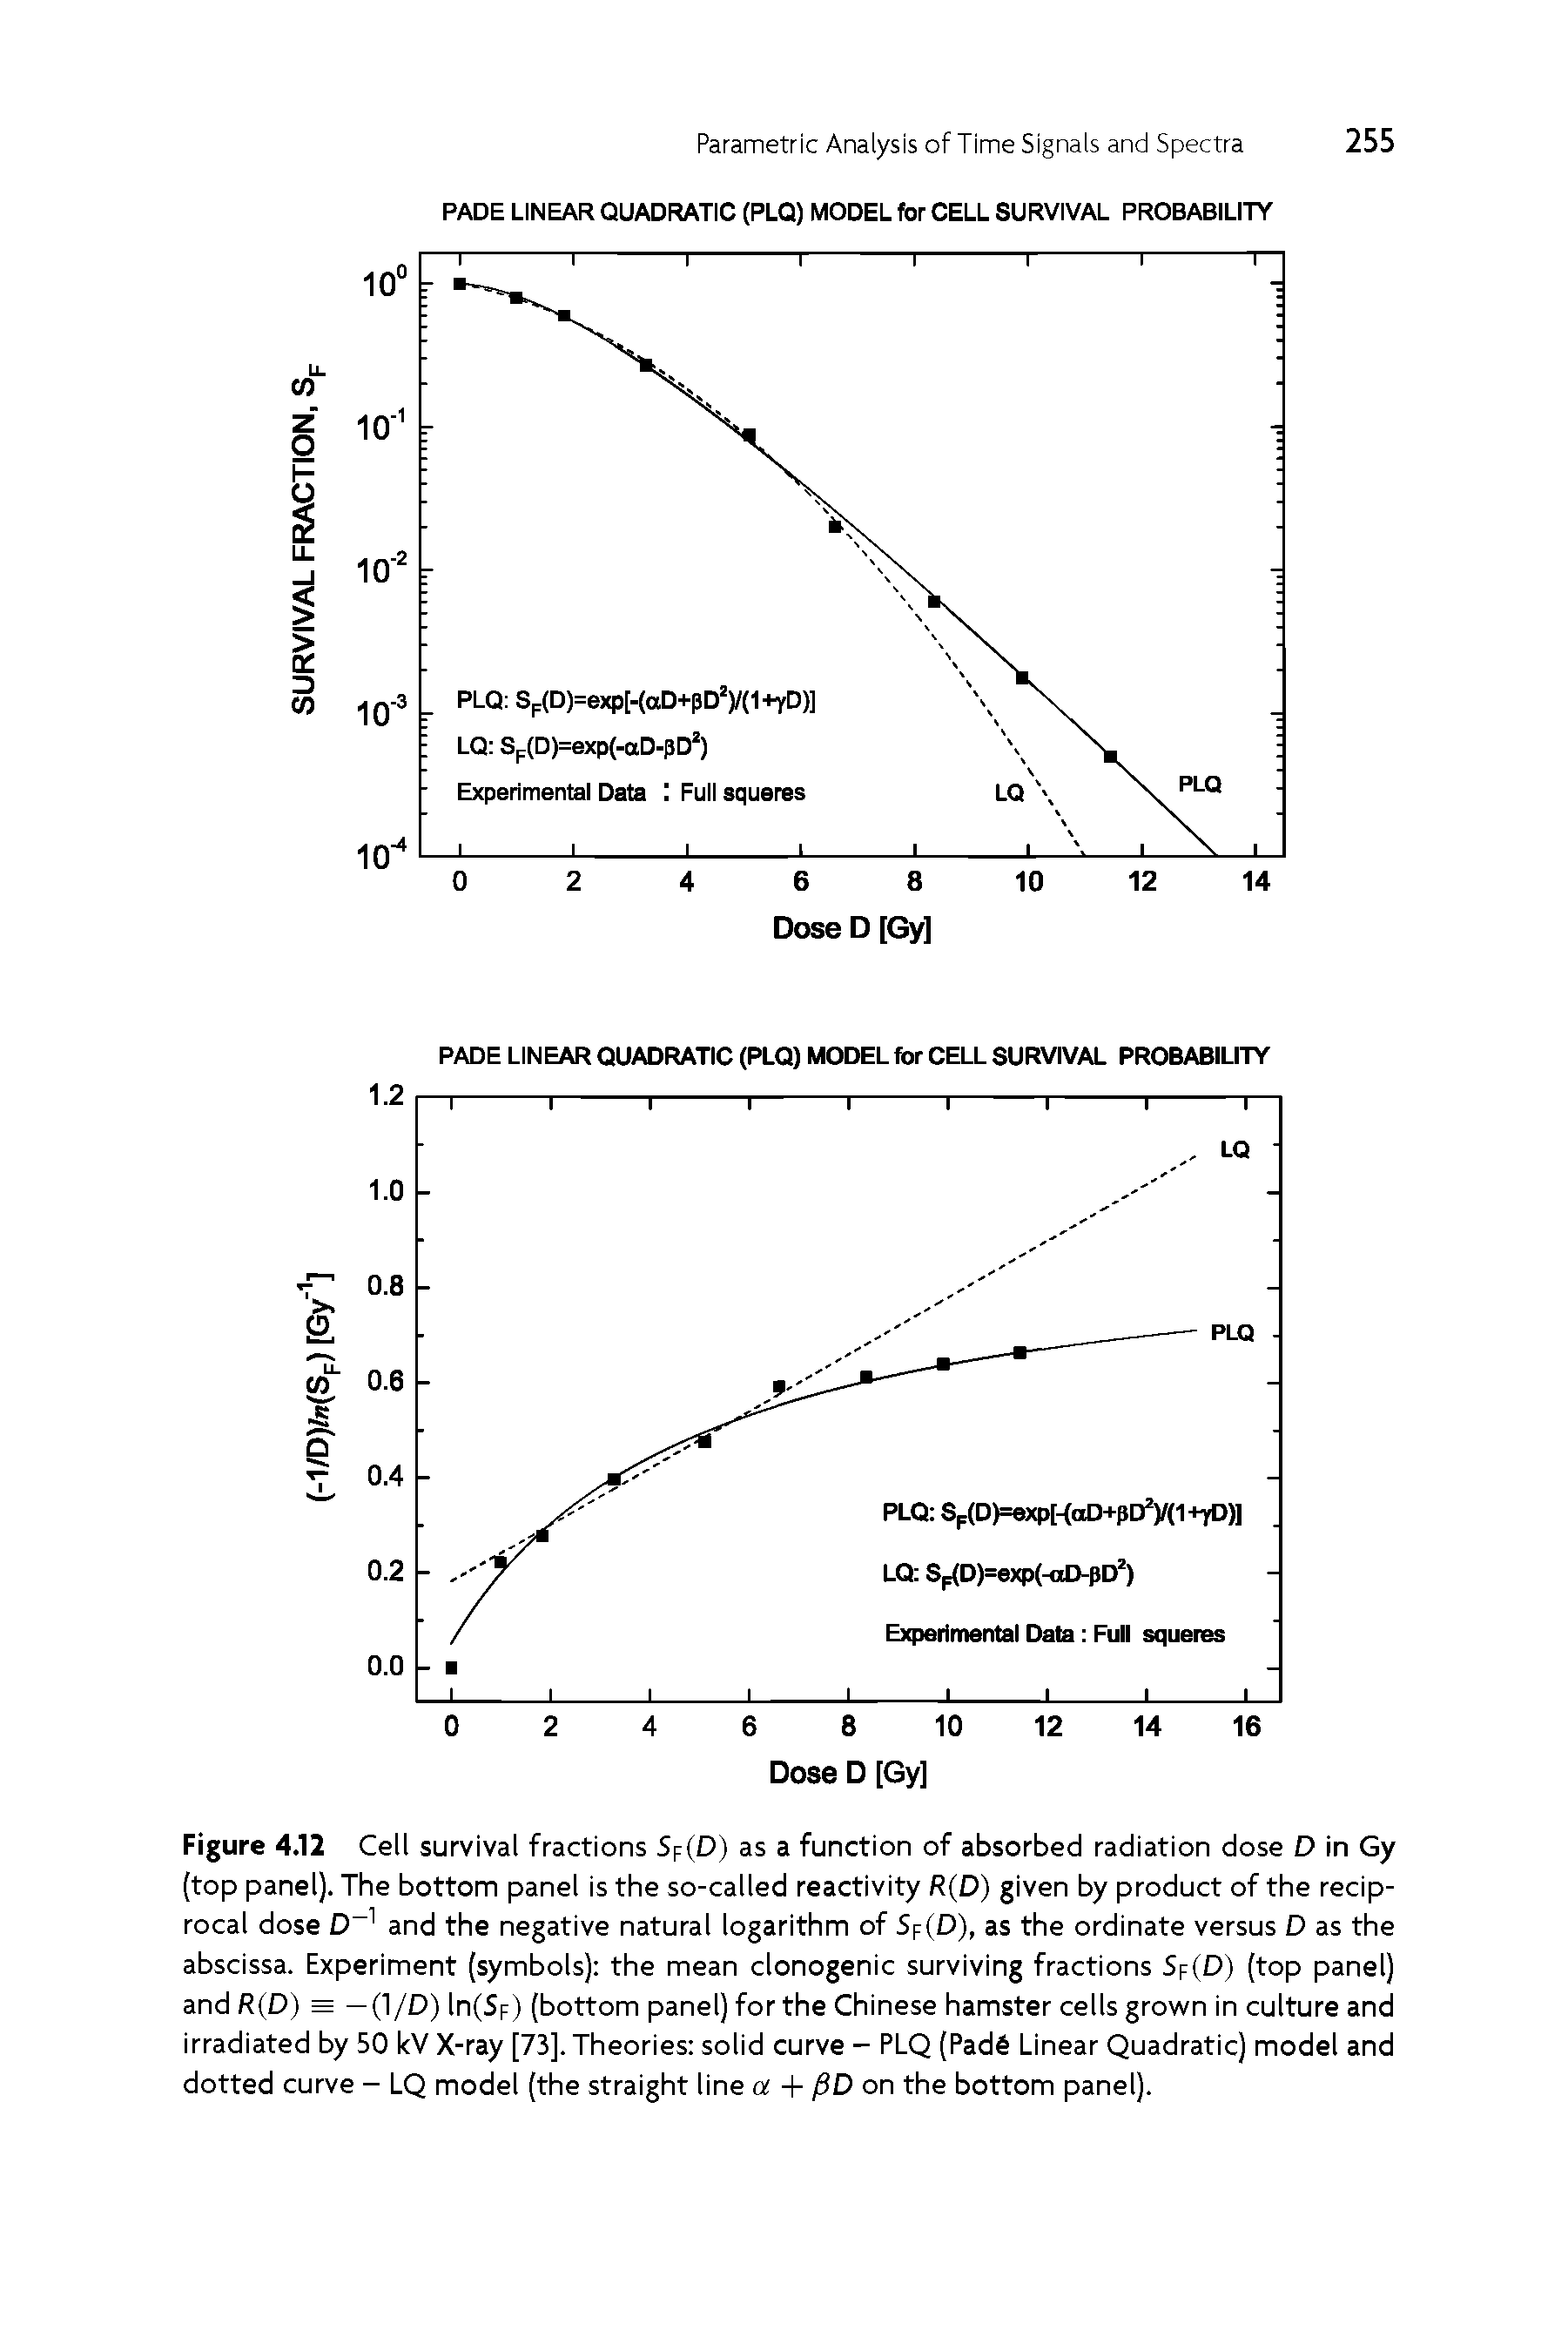 Figure 4.12 Cell survival fractions SF(D) as a function of absorbed radiation dose D in Gy (top panel). The bottom panel is the so-called reactivity R(D) given by product of the reciprocal dose D-1 and the negative natural logarithm of SF(D), as the ordinate versus D as the abscissa. Experiment (symbols) the mean clonogenic surviving fractions SF(D) (top panel) and R(D) = — (1/D) ln(SF) (bottom panel) for the Chinese hamster cells grown in culture and irradiated by 50 kV X-ray [73]. Theories solid curve - PLQ (Pads Linear Quadratic) model and dotted curve - LQ model (the straight line a + /SD on the bottom panel).